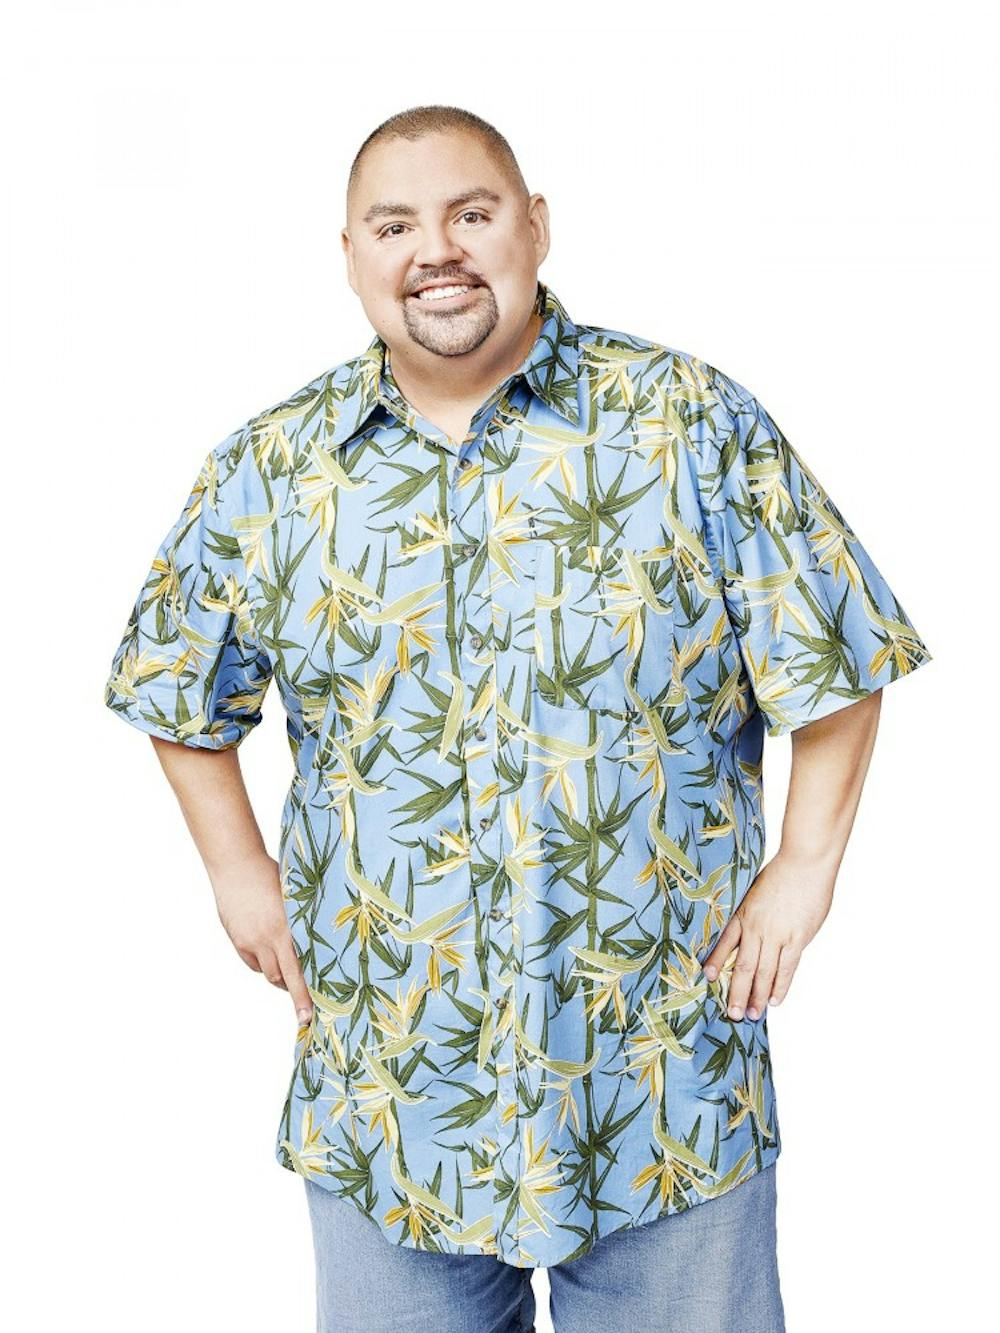 <p>Gabriel Iglesias, renowned comedian, will be performing at Shea’s Performing Arts Center on Sunday. The 39 year old is currently featured on Fuse TV’s “Fluffy Breaks Even.”</p>